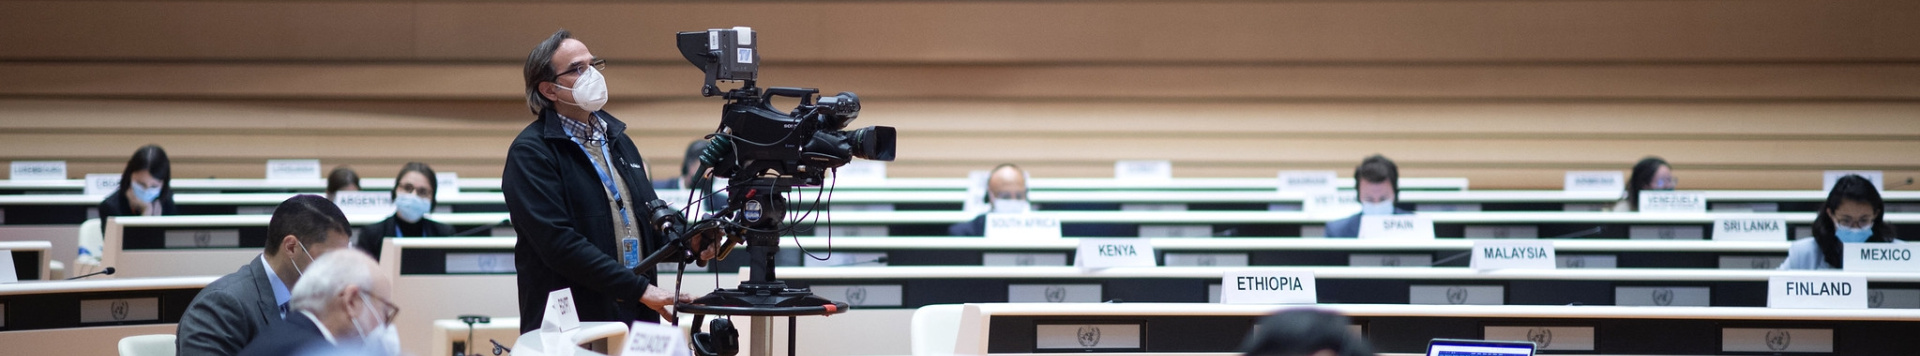 A camera man filming inside one of UN Geneva's conference rooms.